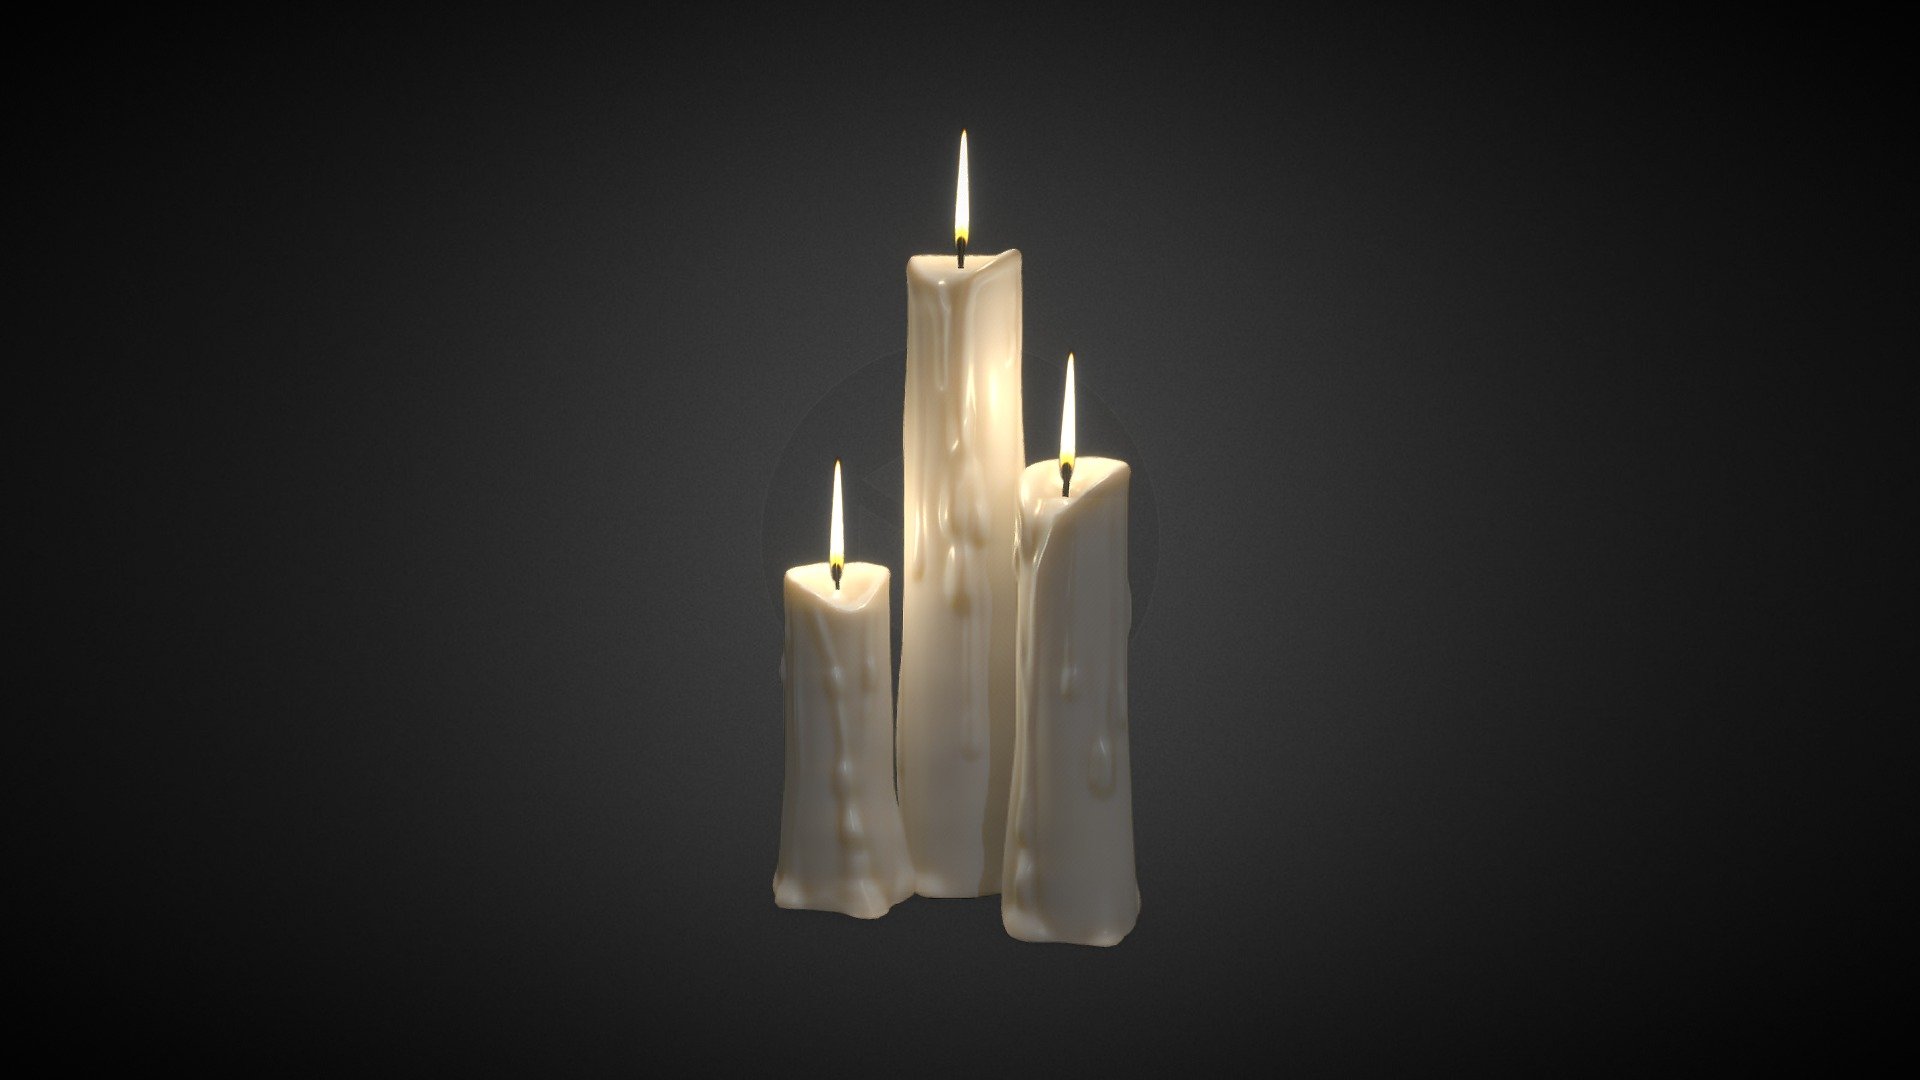 A Set of Candles I created for another Project 3d model